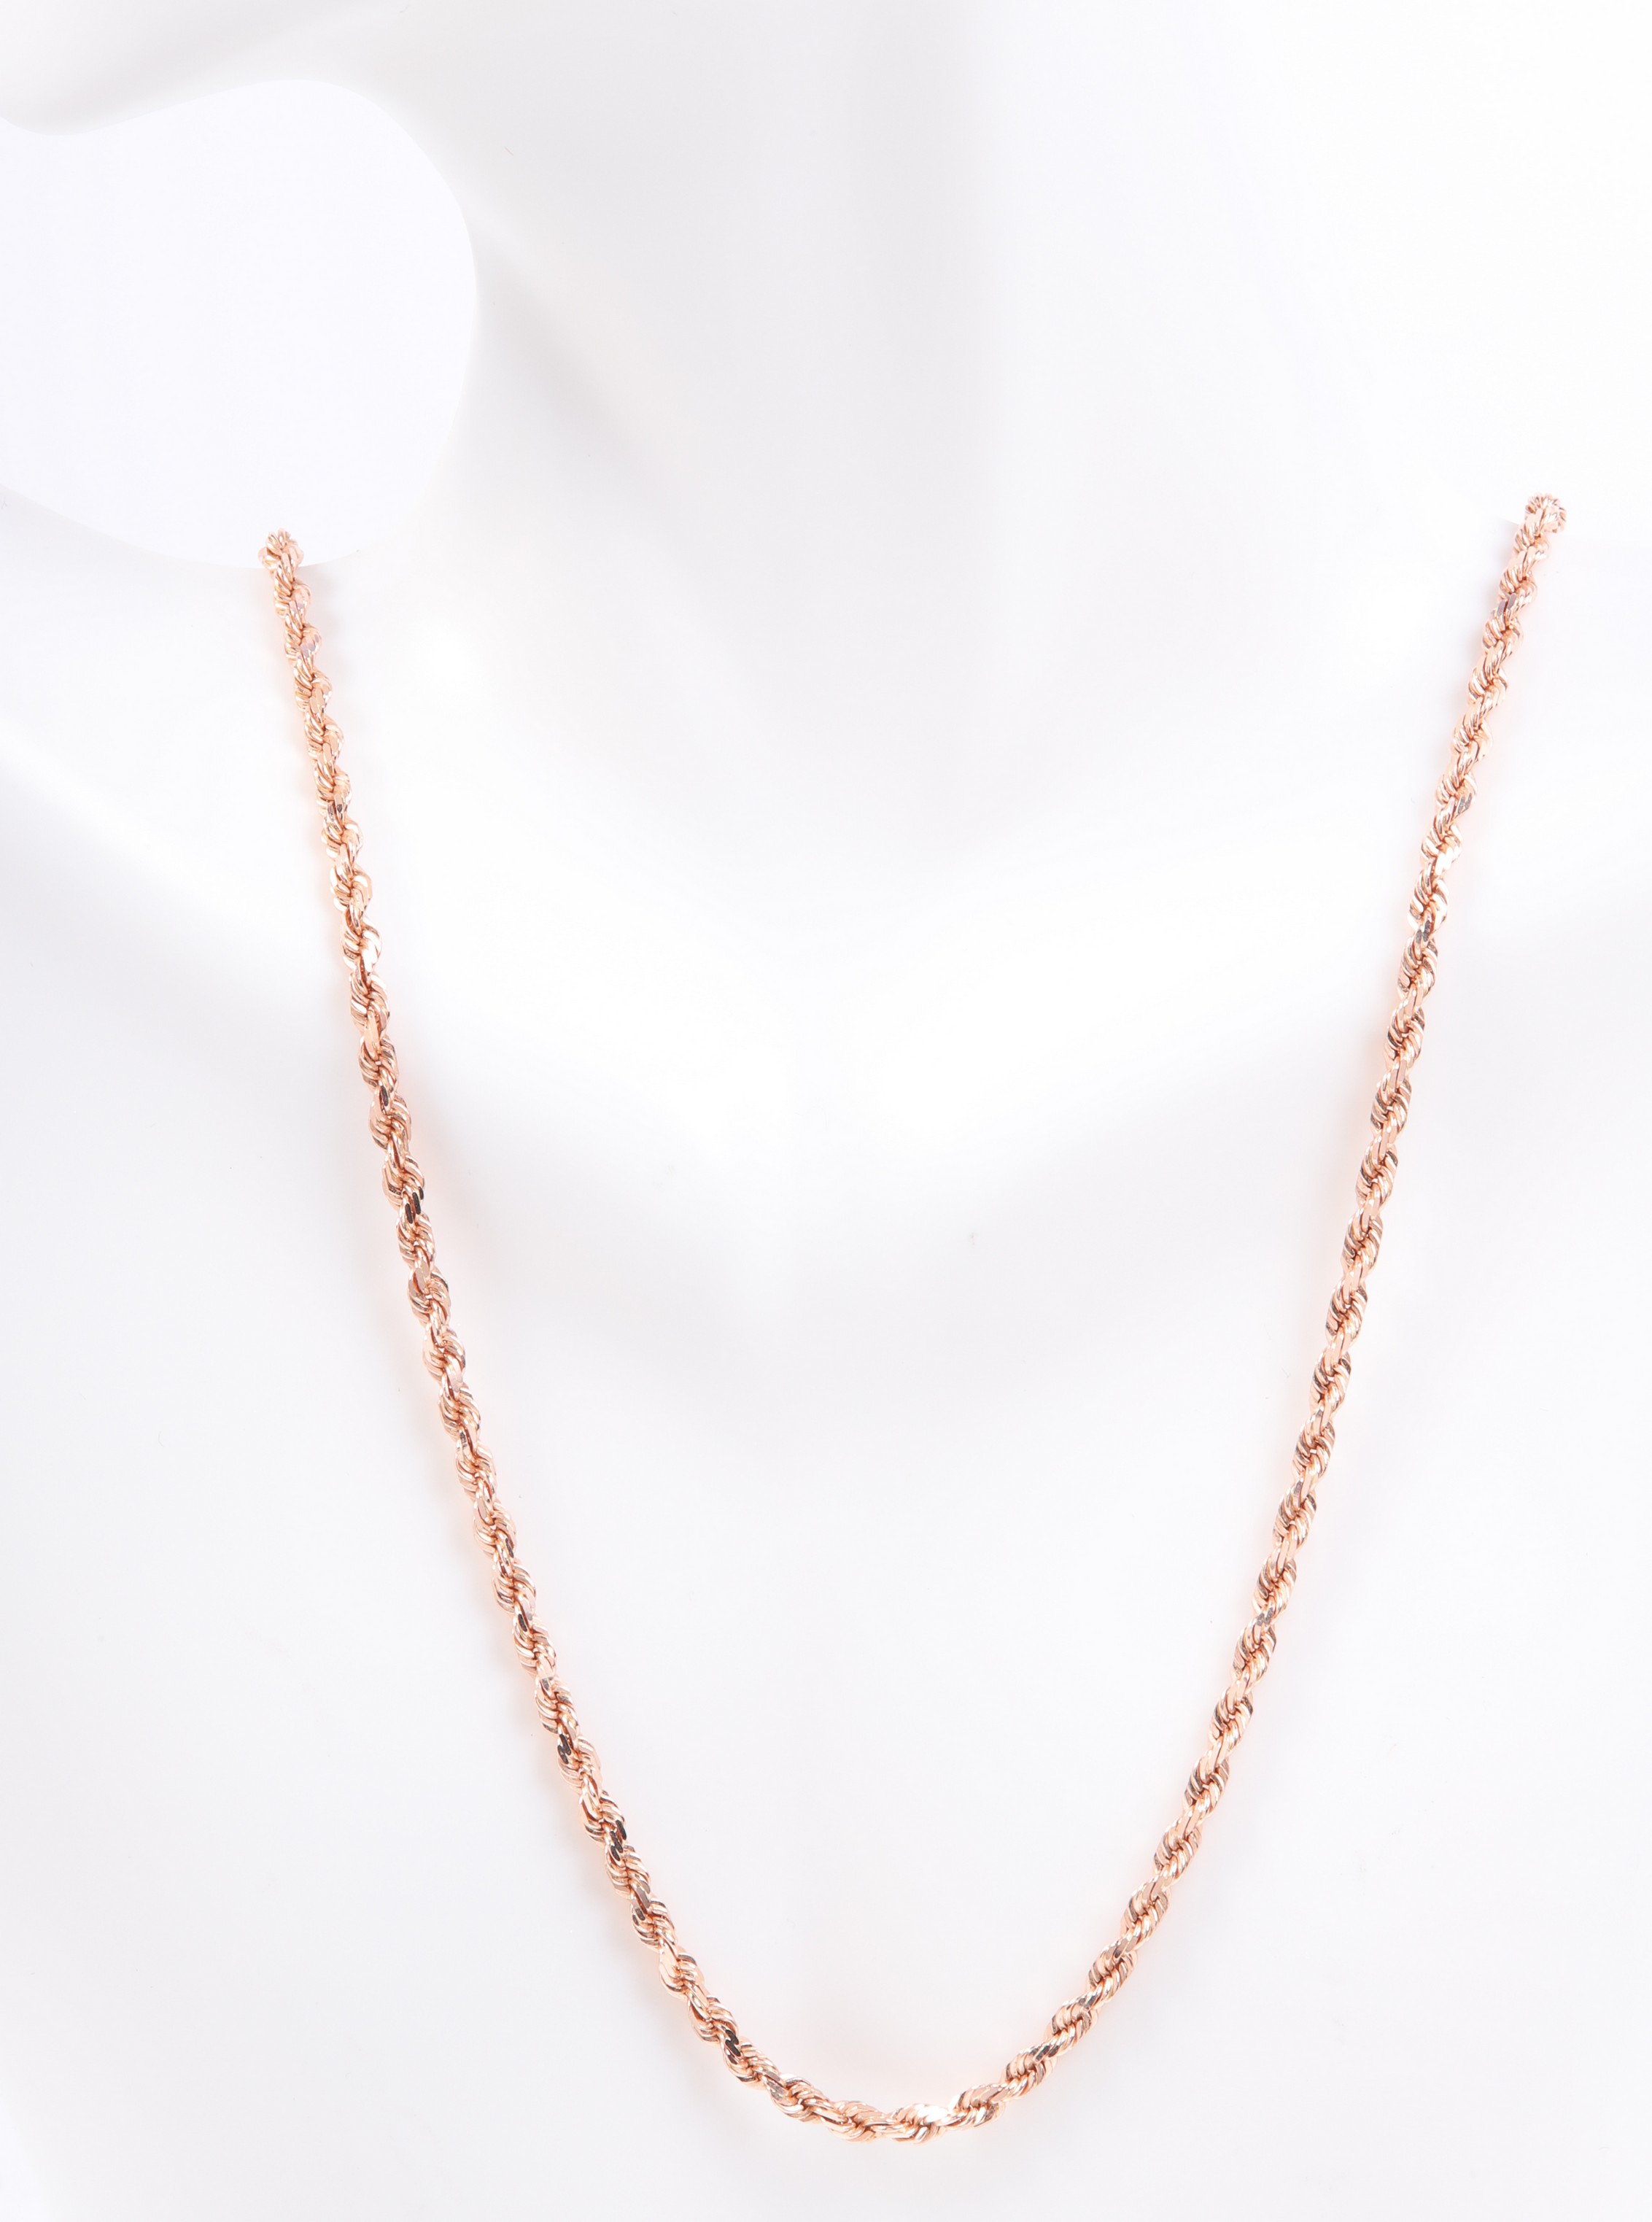 14K Rose gold rope chain necklace,